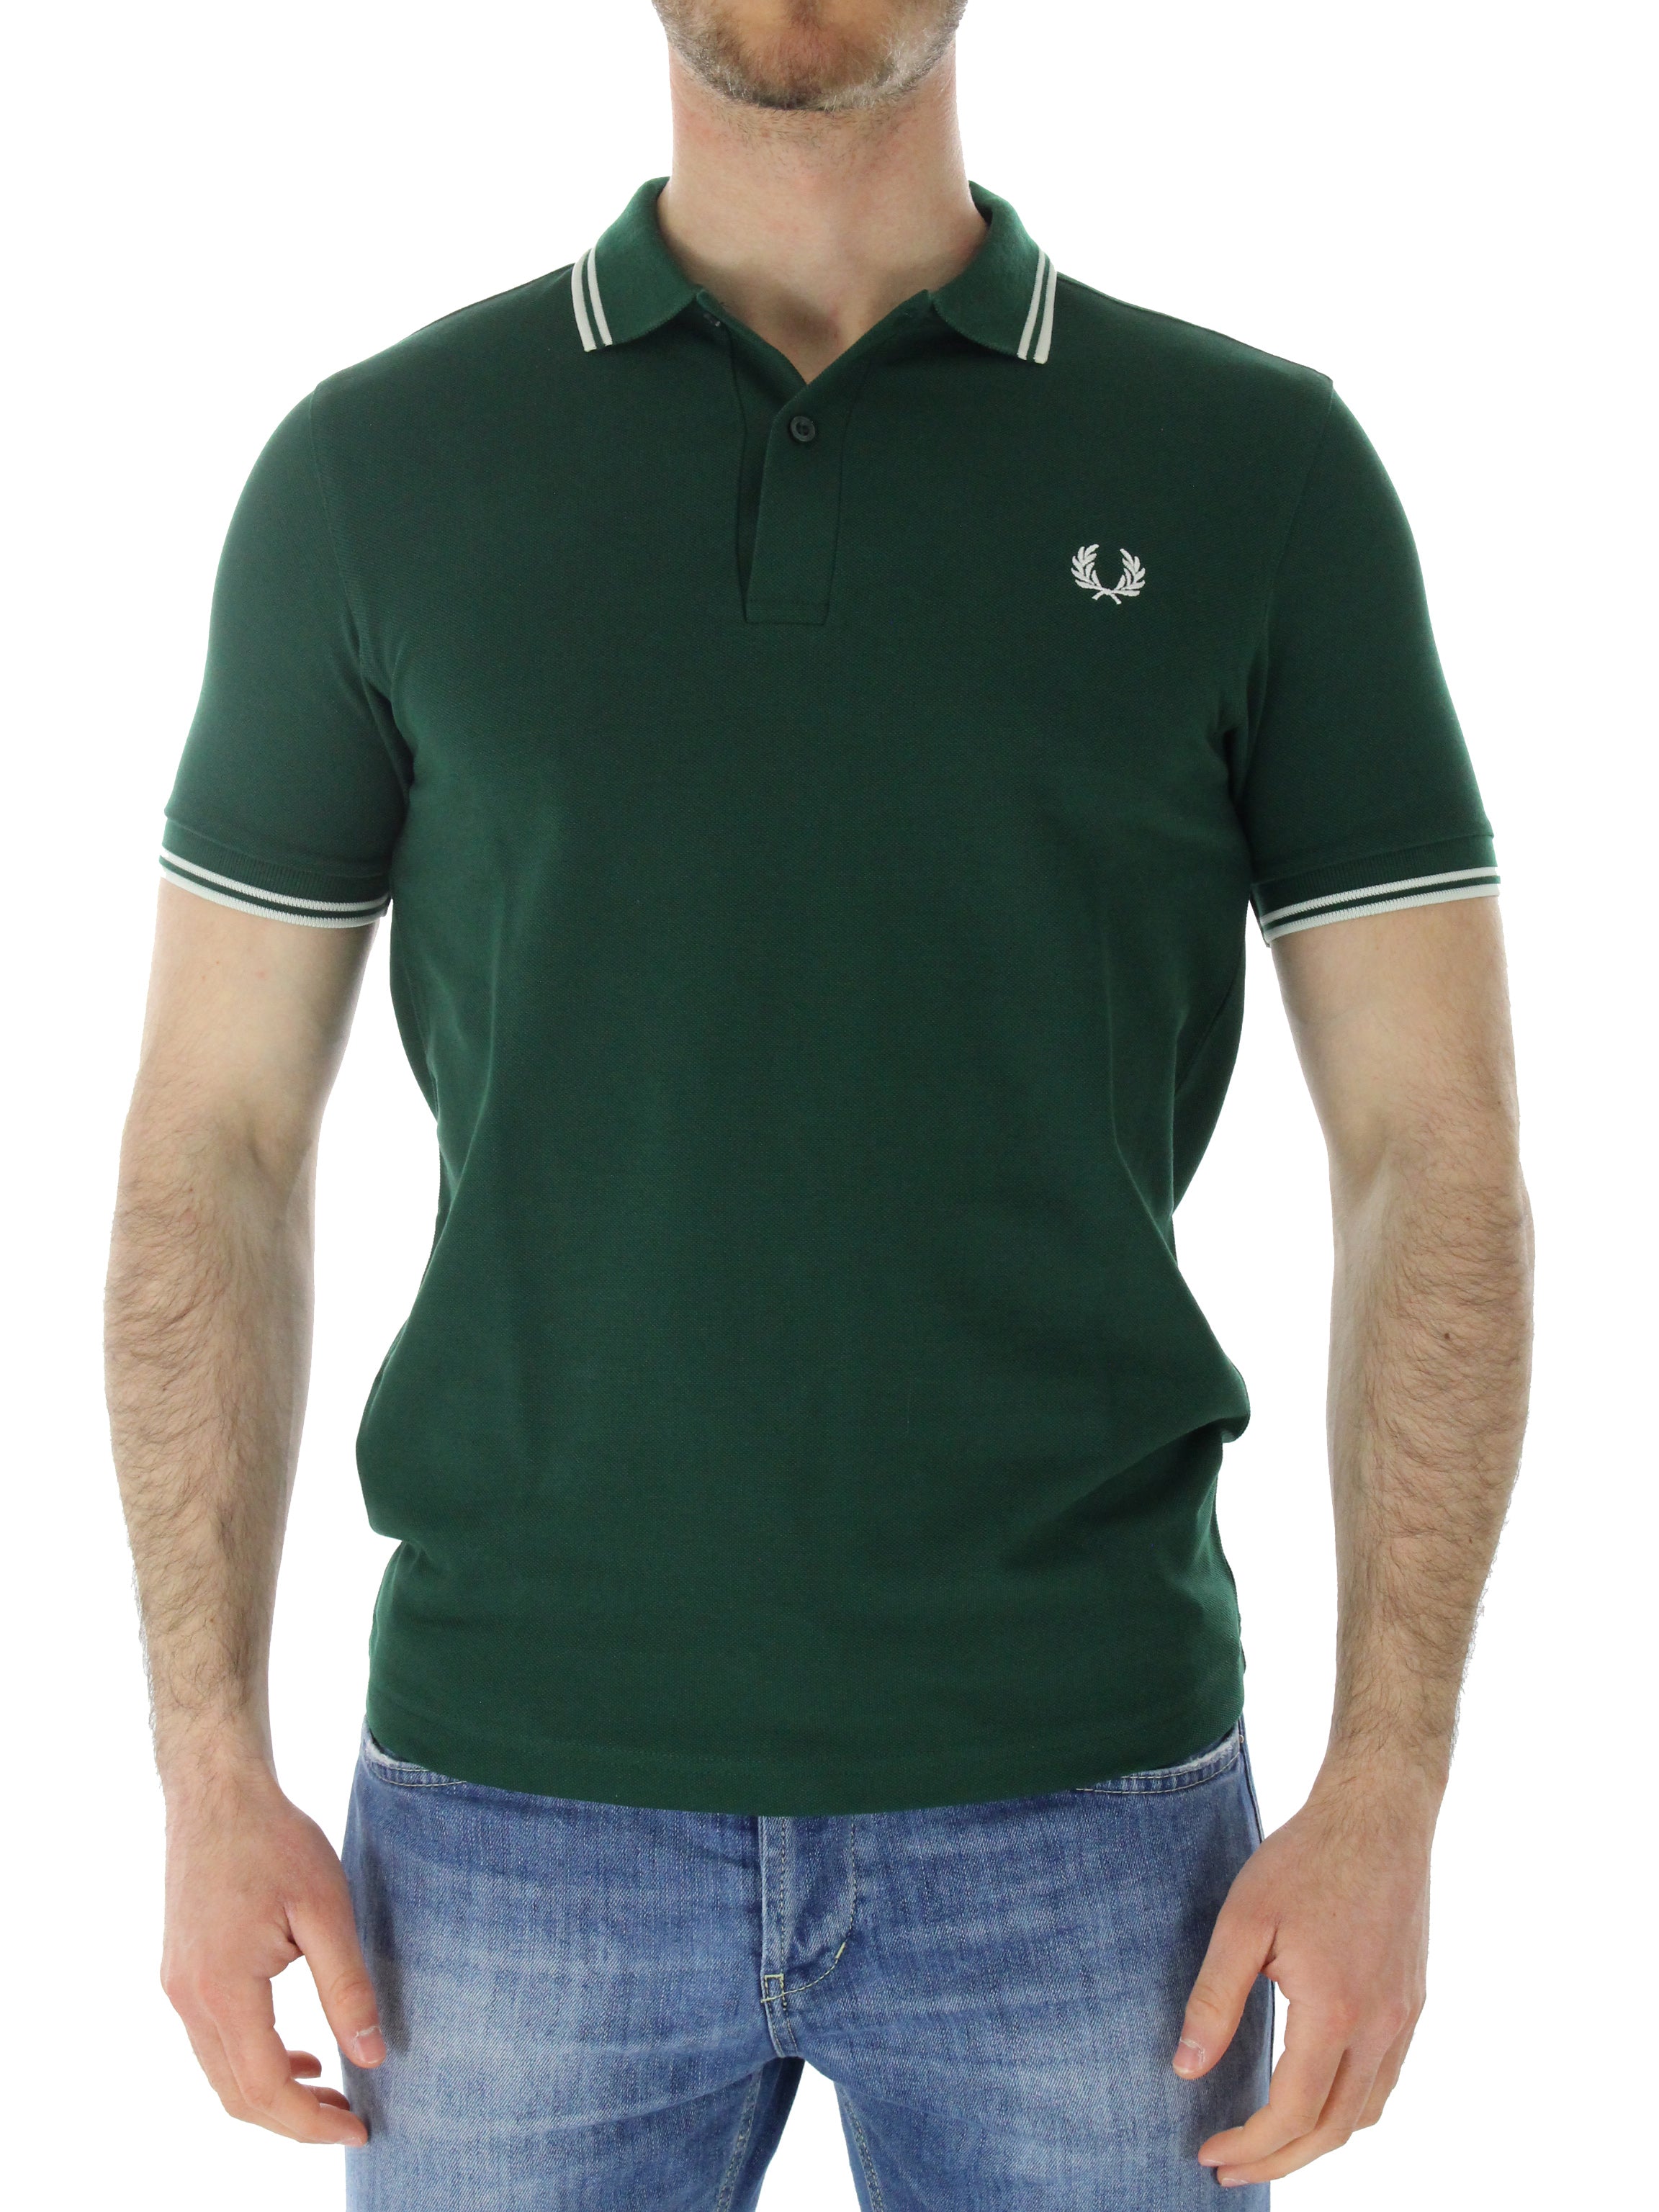 Fred perry polo righino